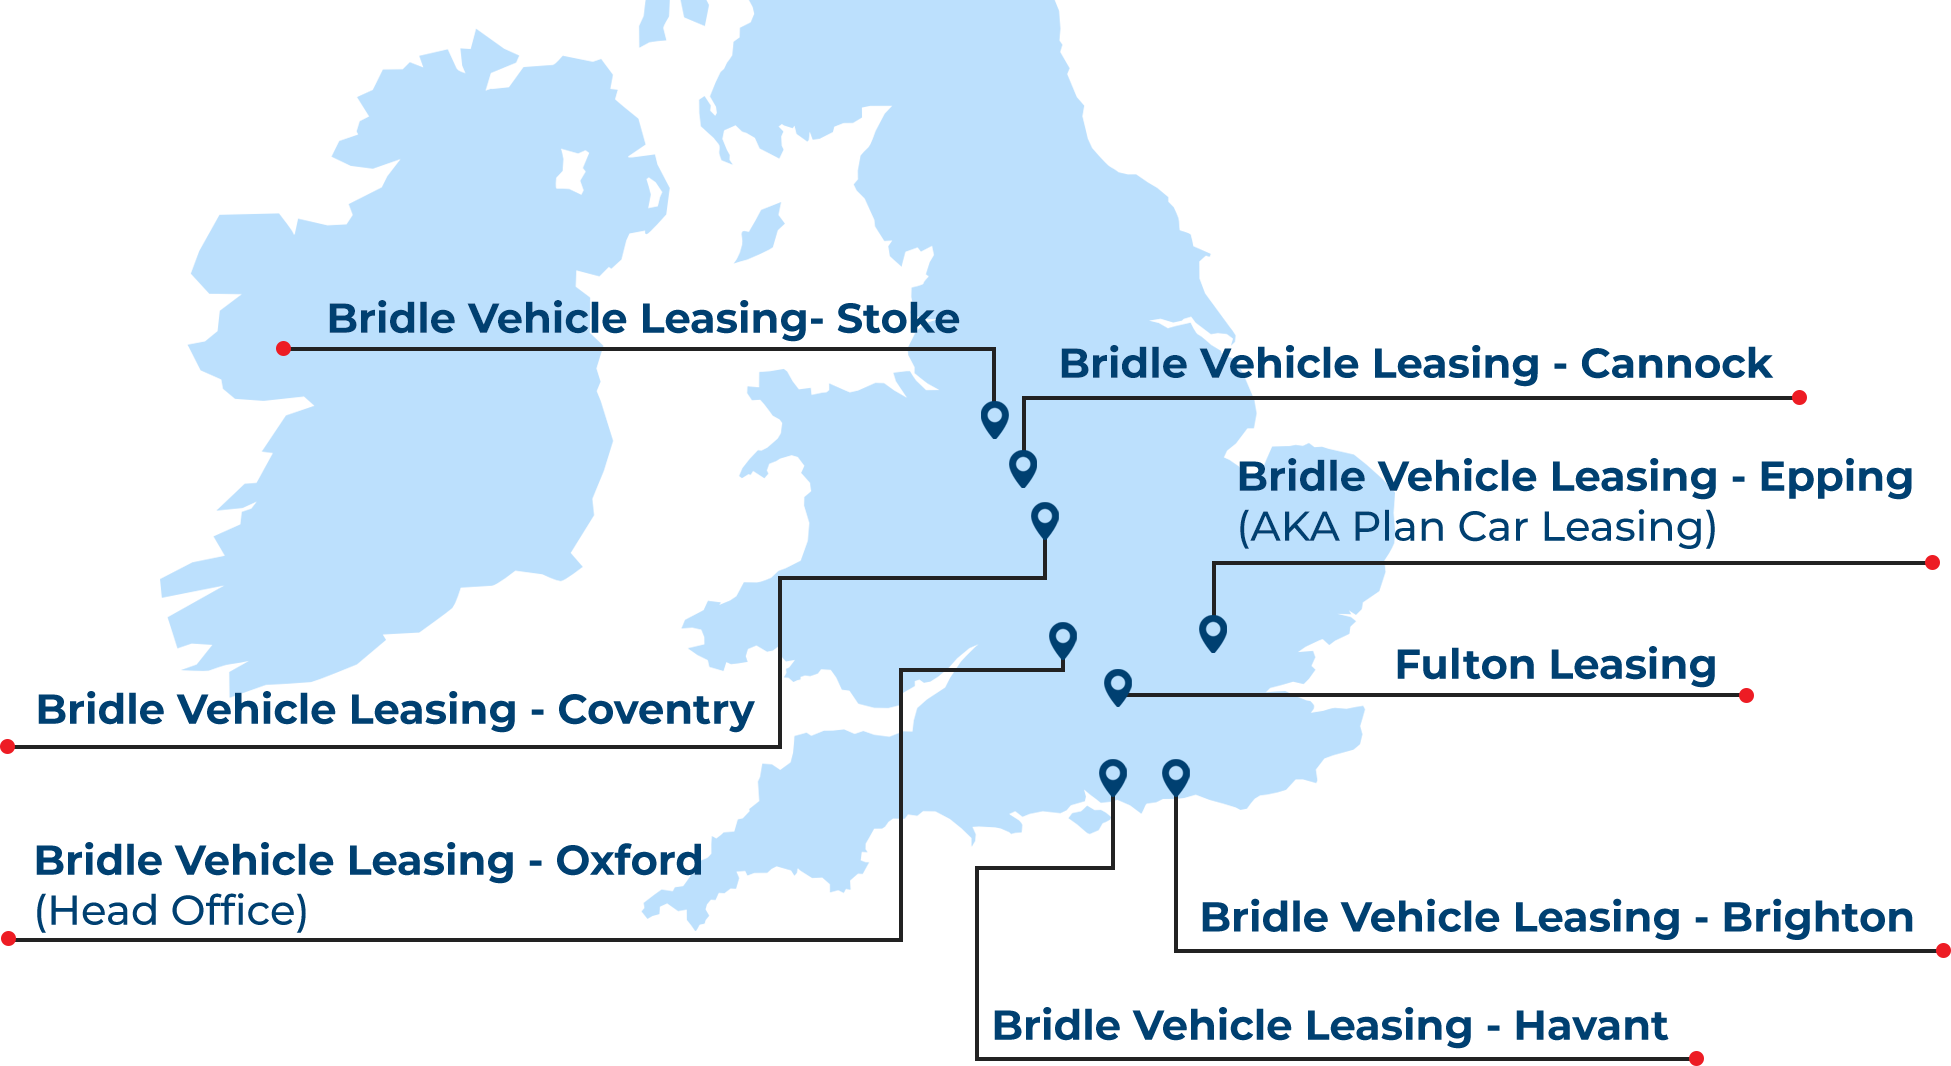 About Bridle Vehicle Leasing